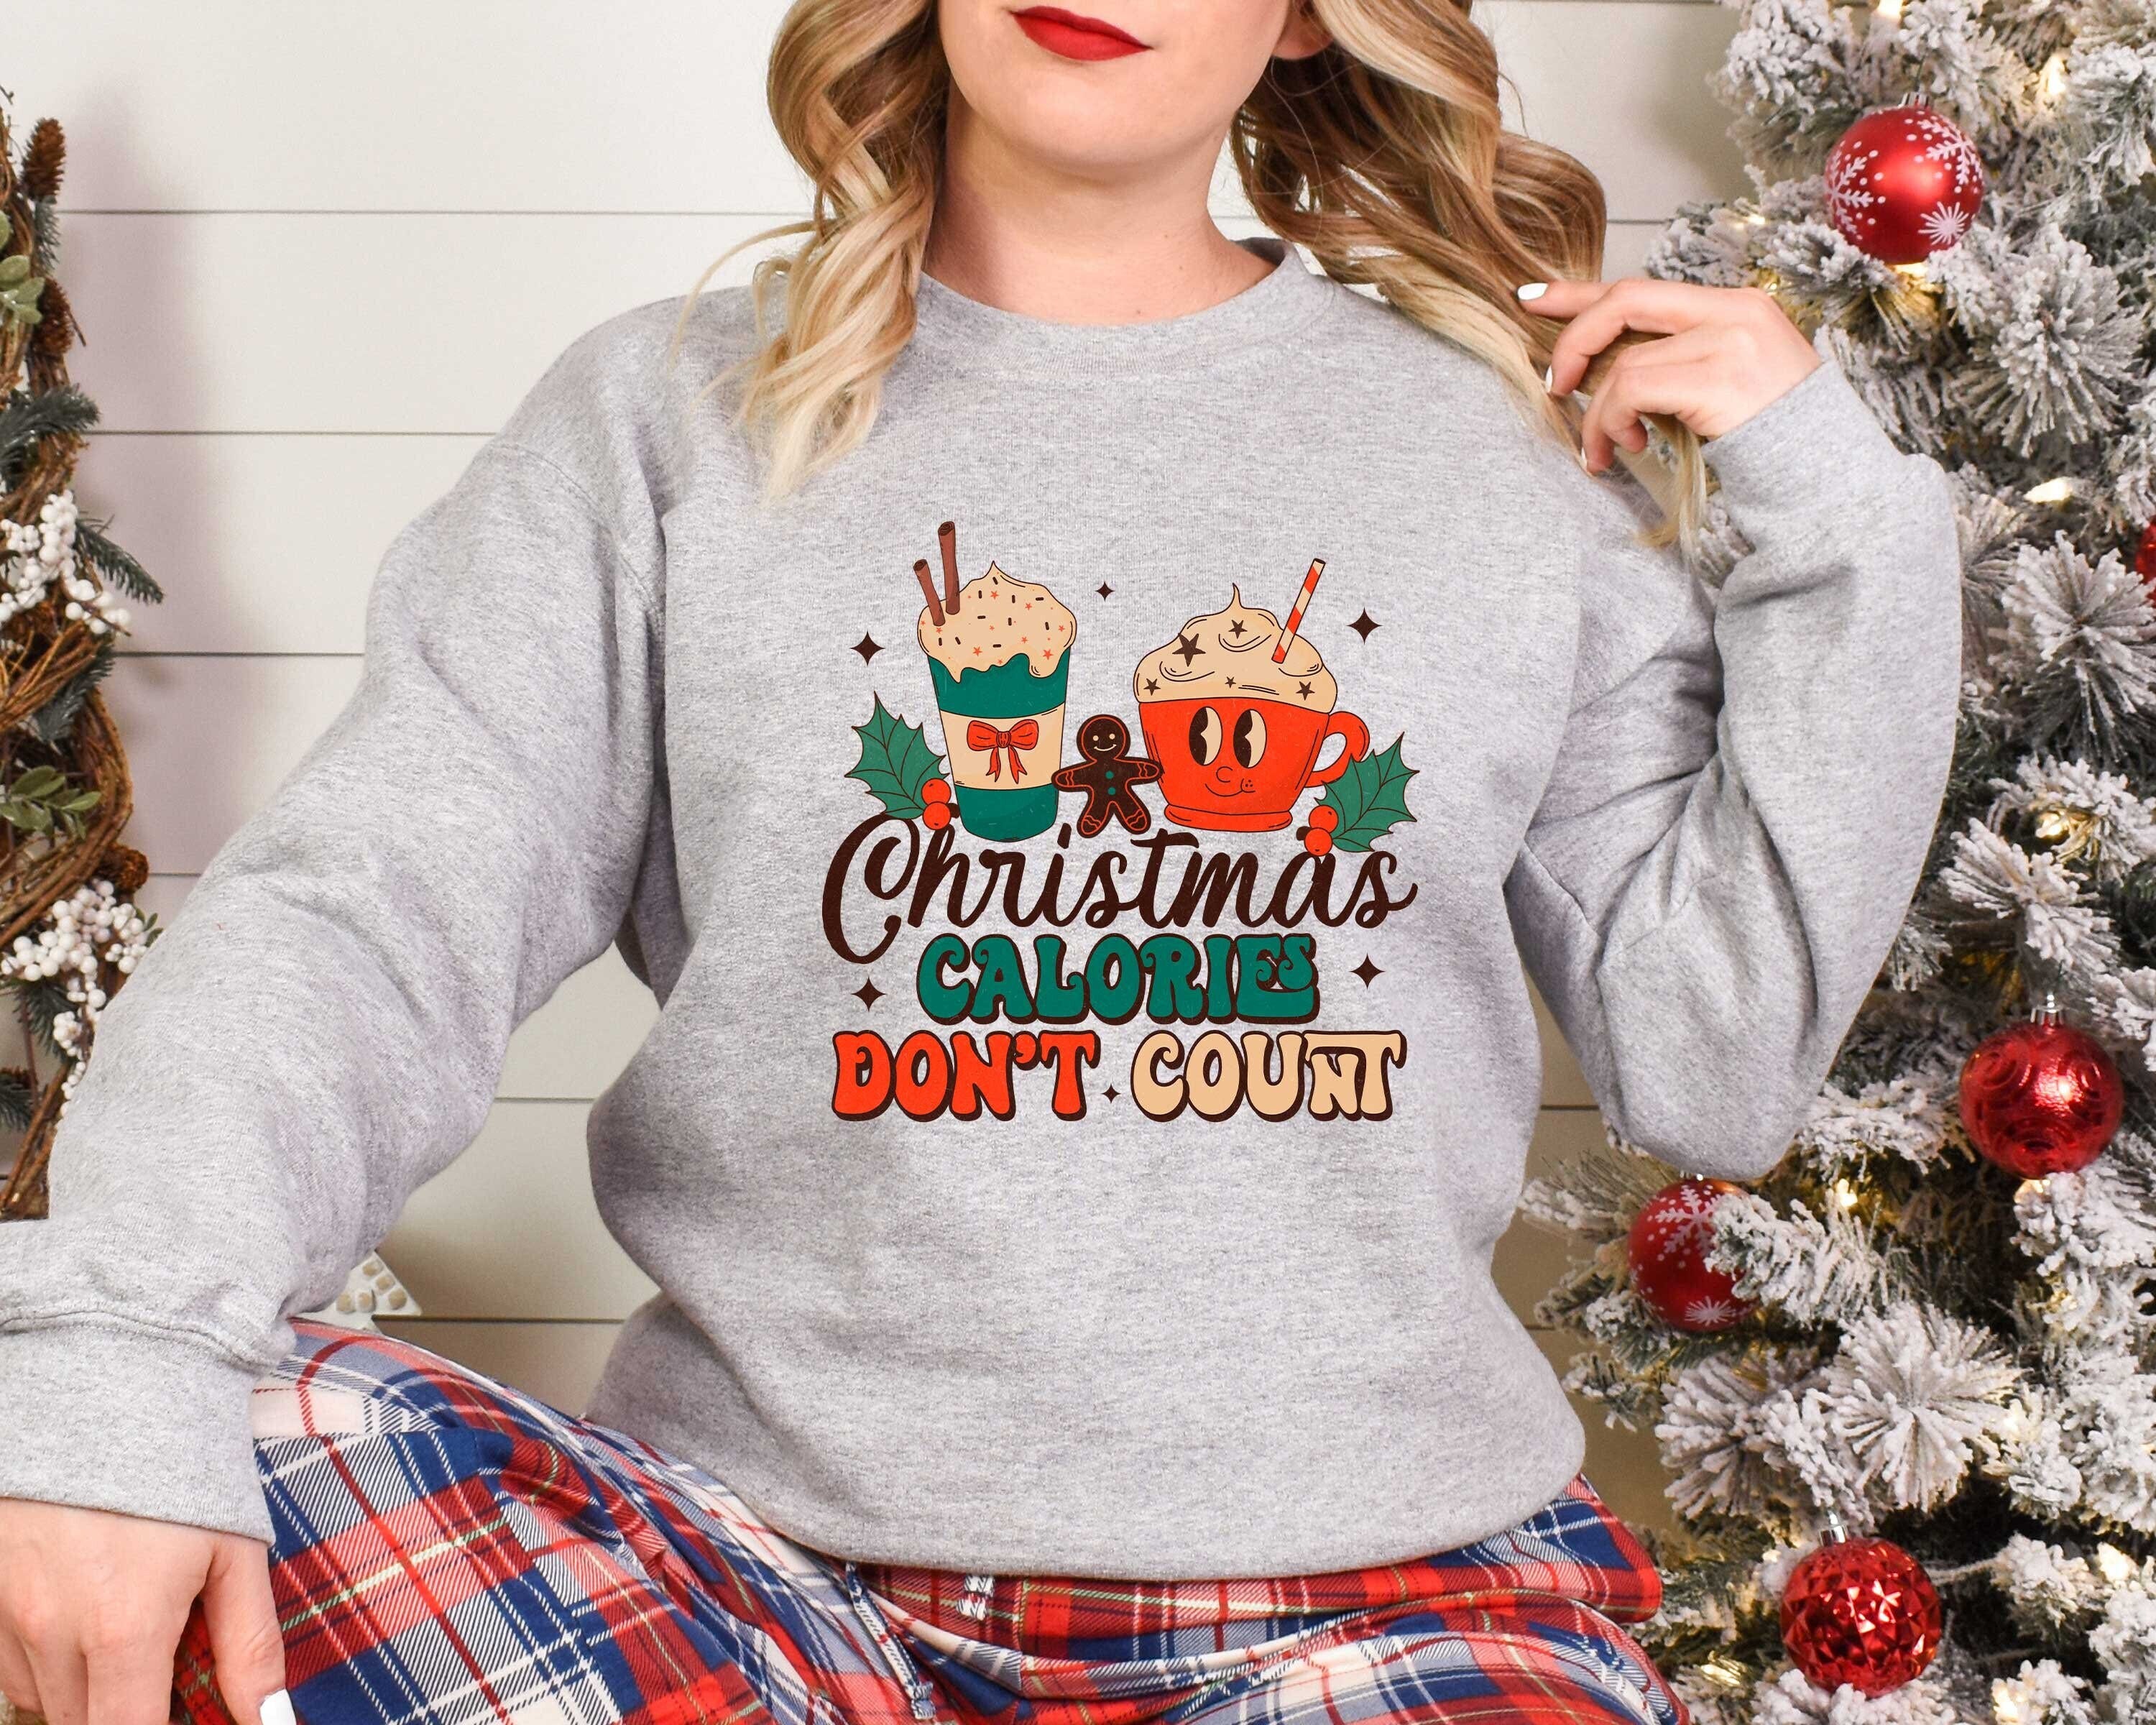 Christmas Calories Dont Count, Cookies Gingerbread Sweatshirt, Christmas Cookies Sweatshirt, Christmas Coffee Sweatshirt, Christmas Gift